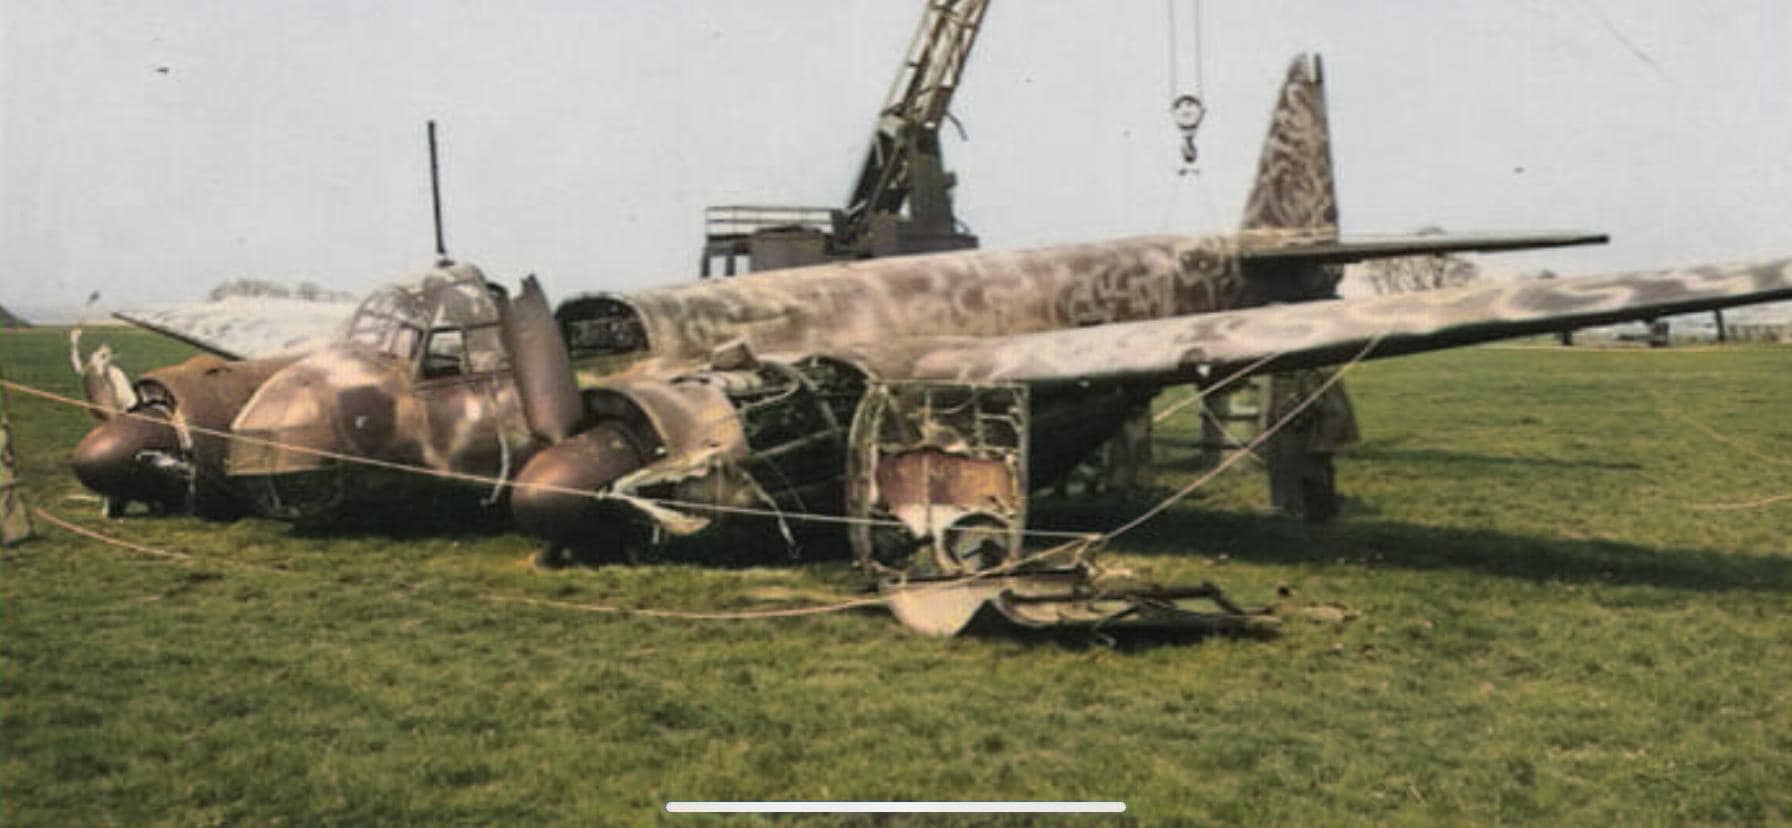 Damaged by AA fire over London, crash landed in Bradwell April 44. Junkers 88.jpg